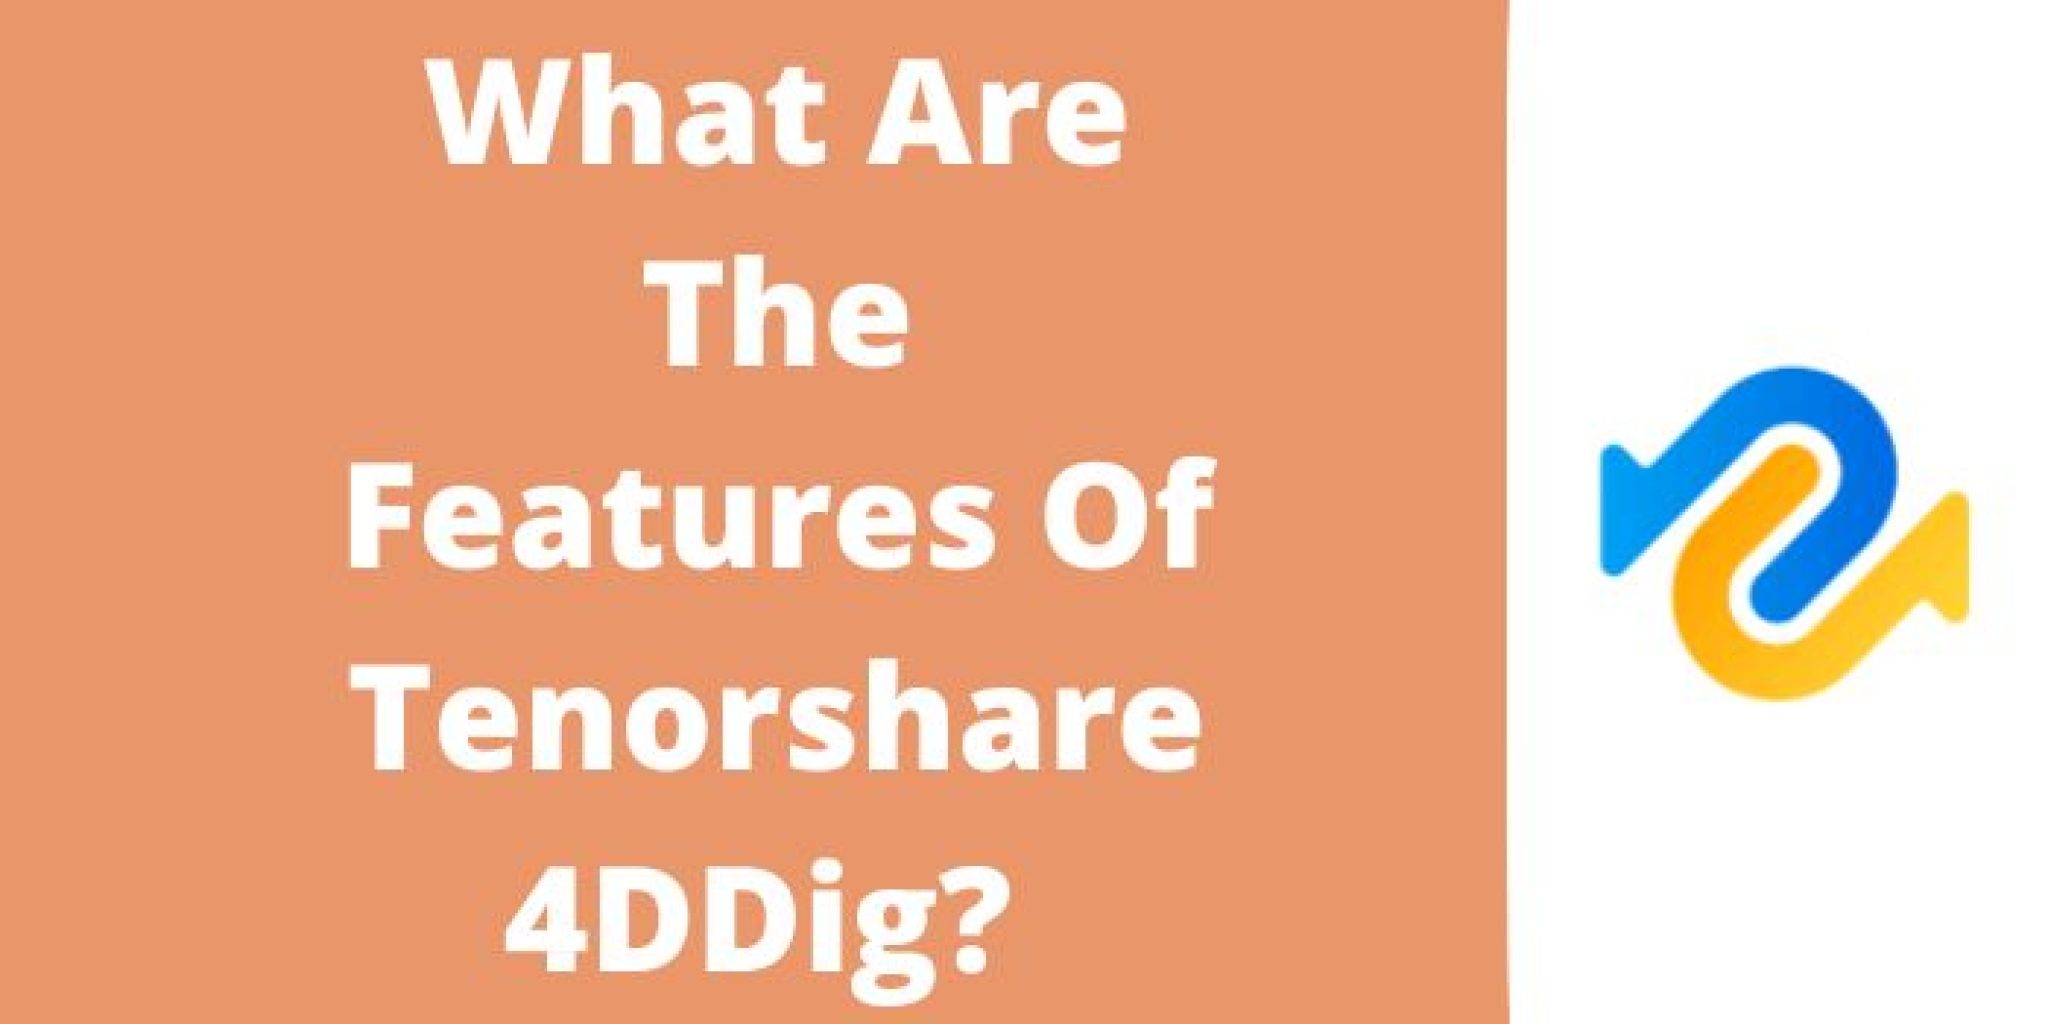 instal the last version for windows Tenorshare 4DDiG 9.6.1.8